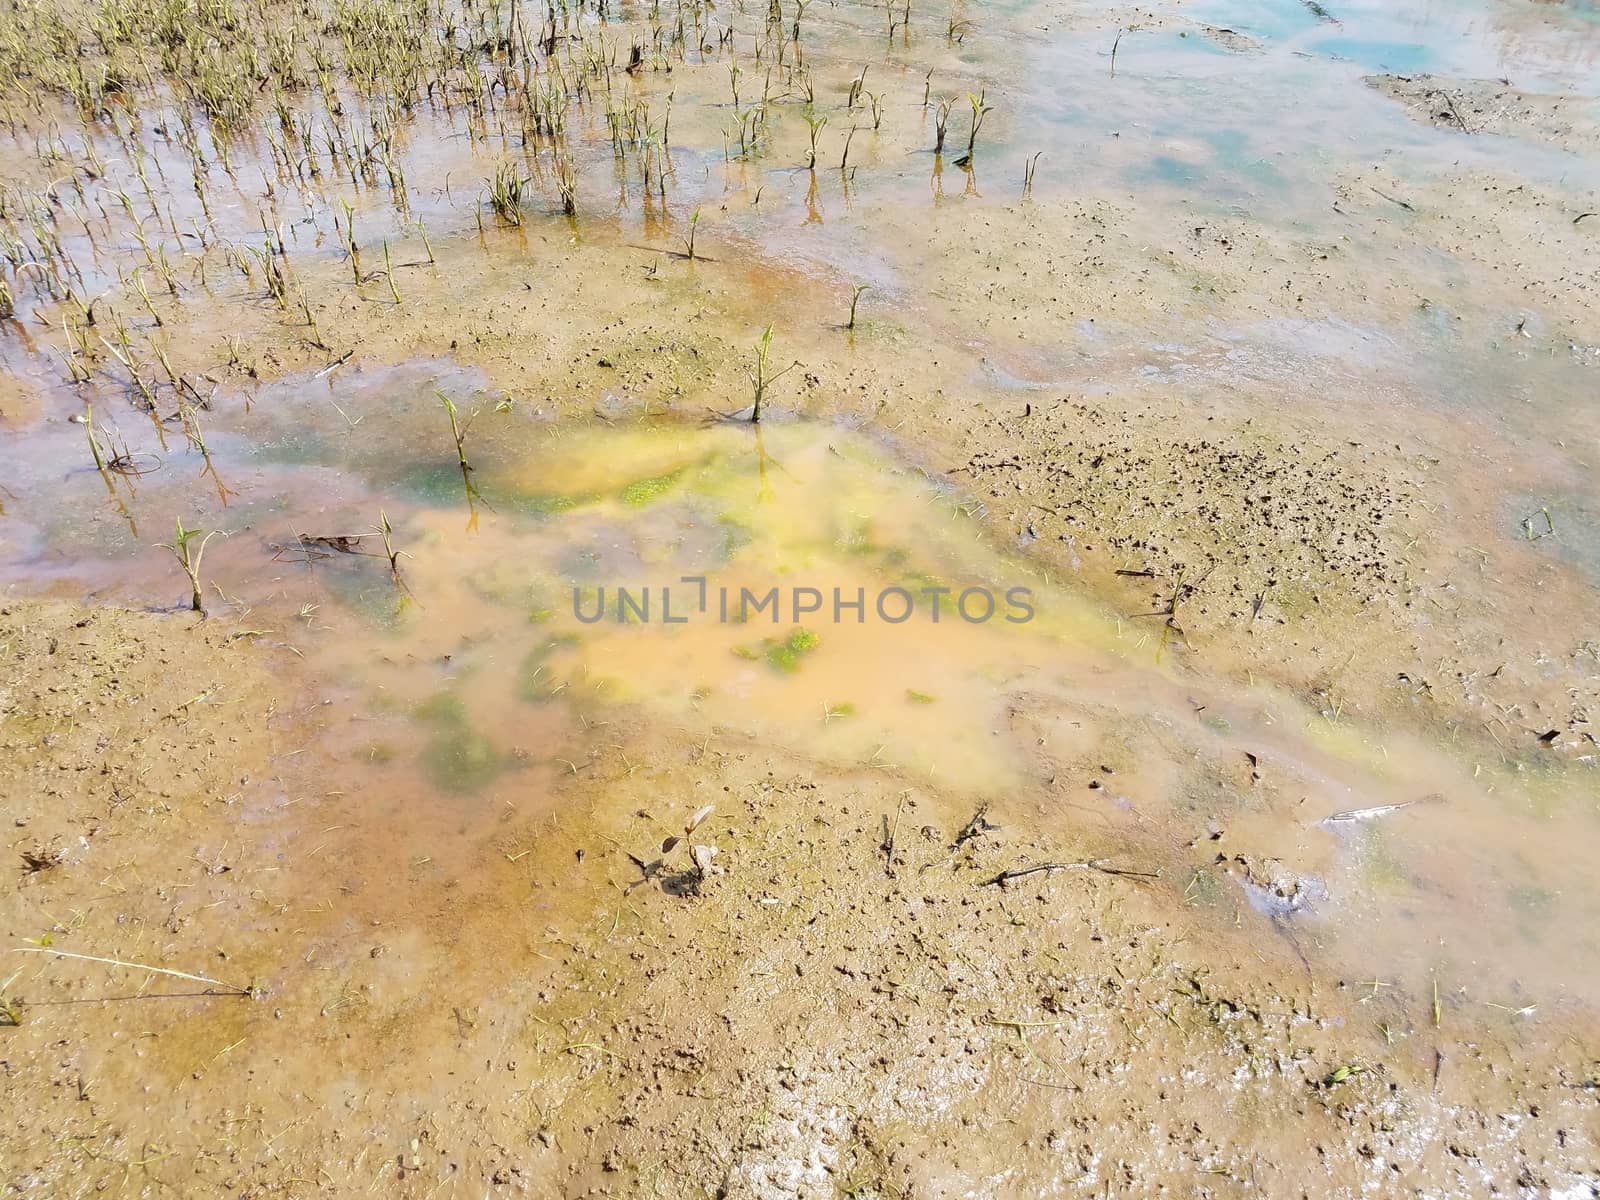 muddy water and algae and plants in swamp or marsh